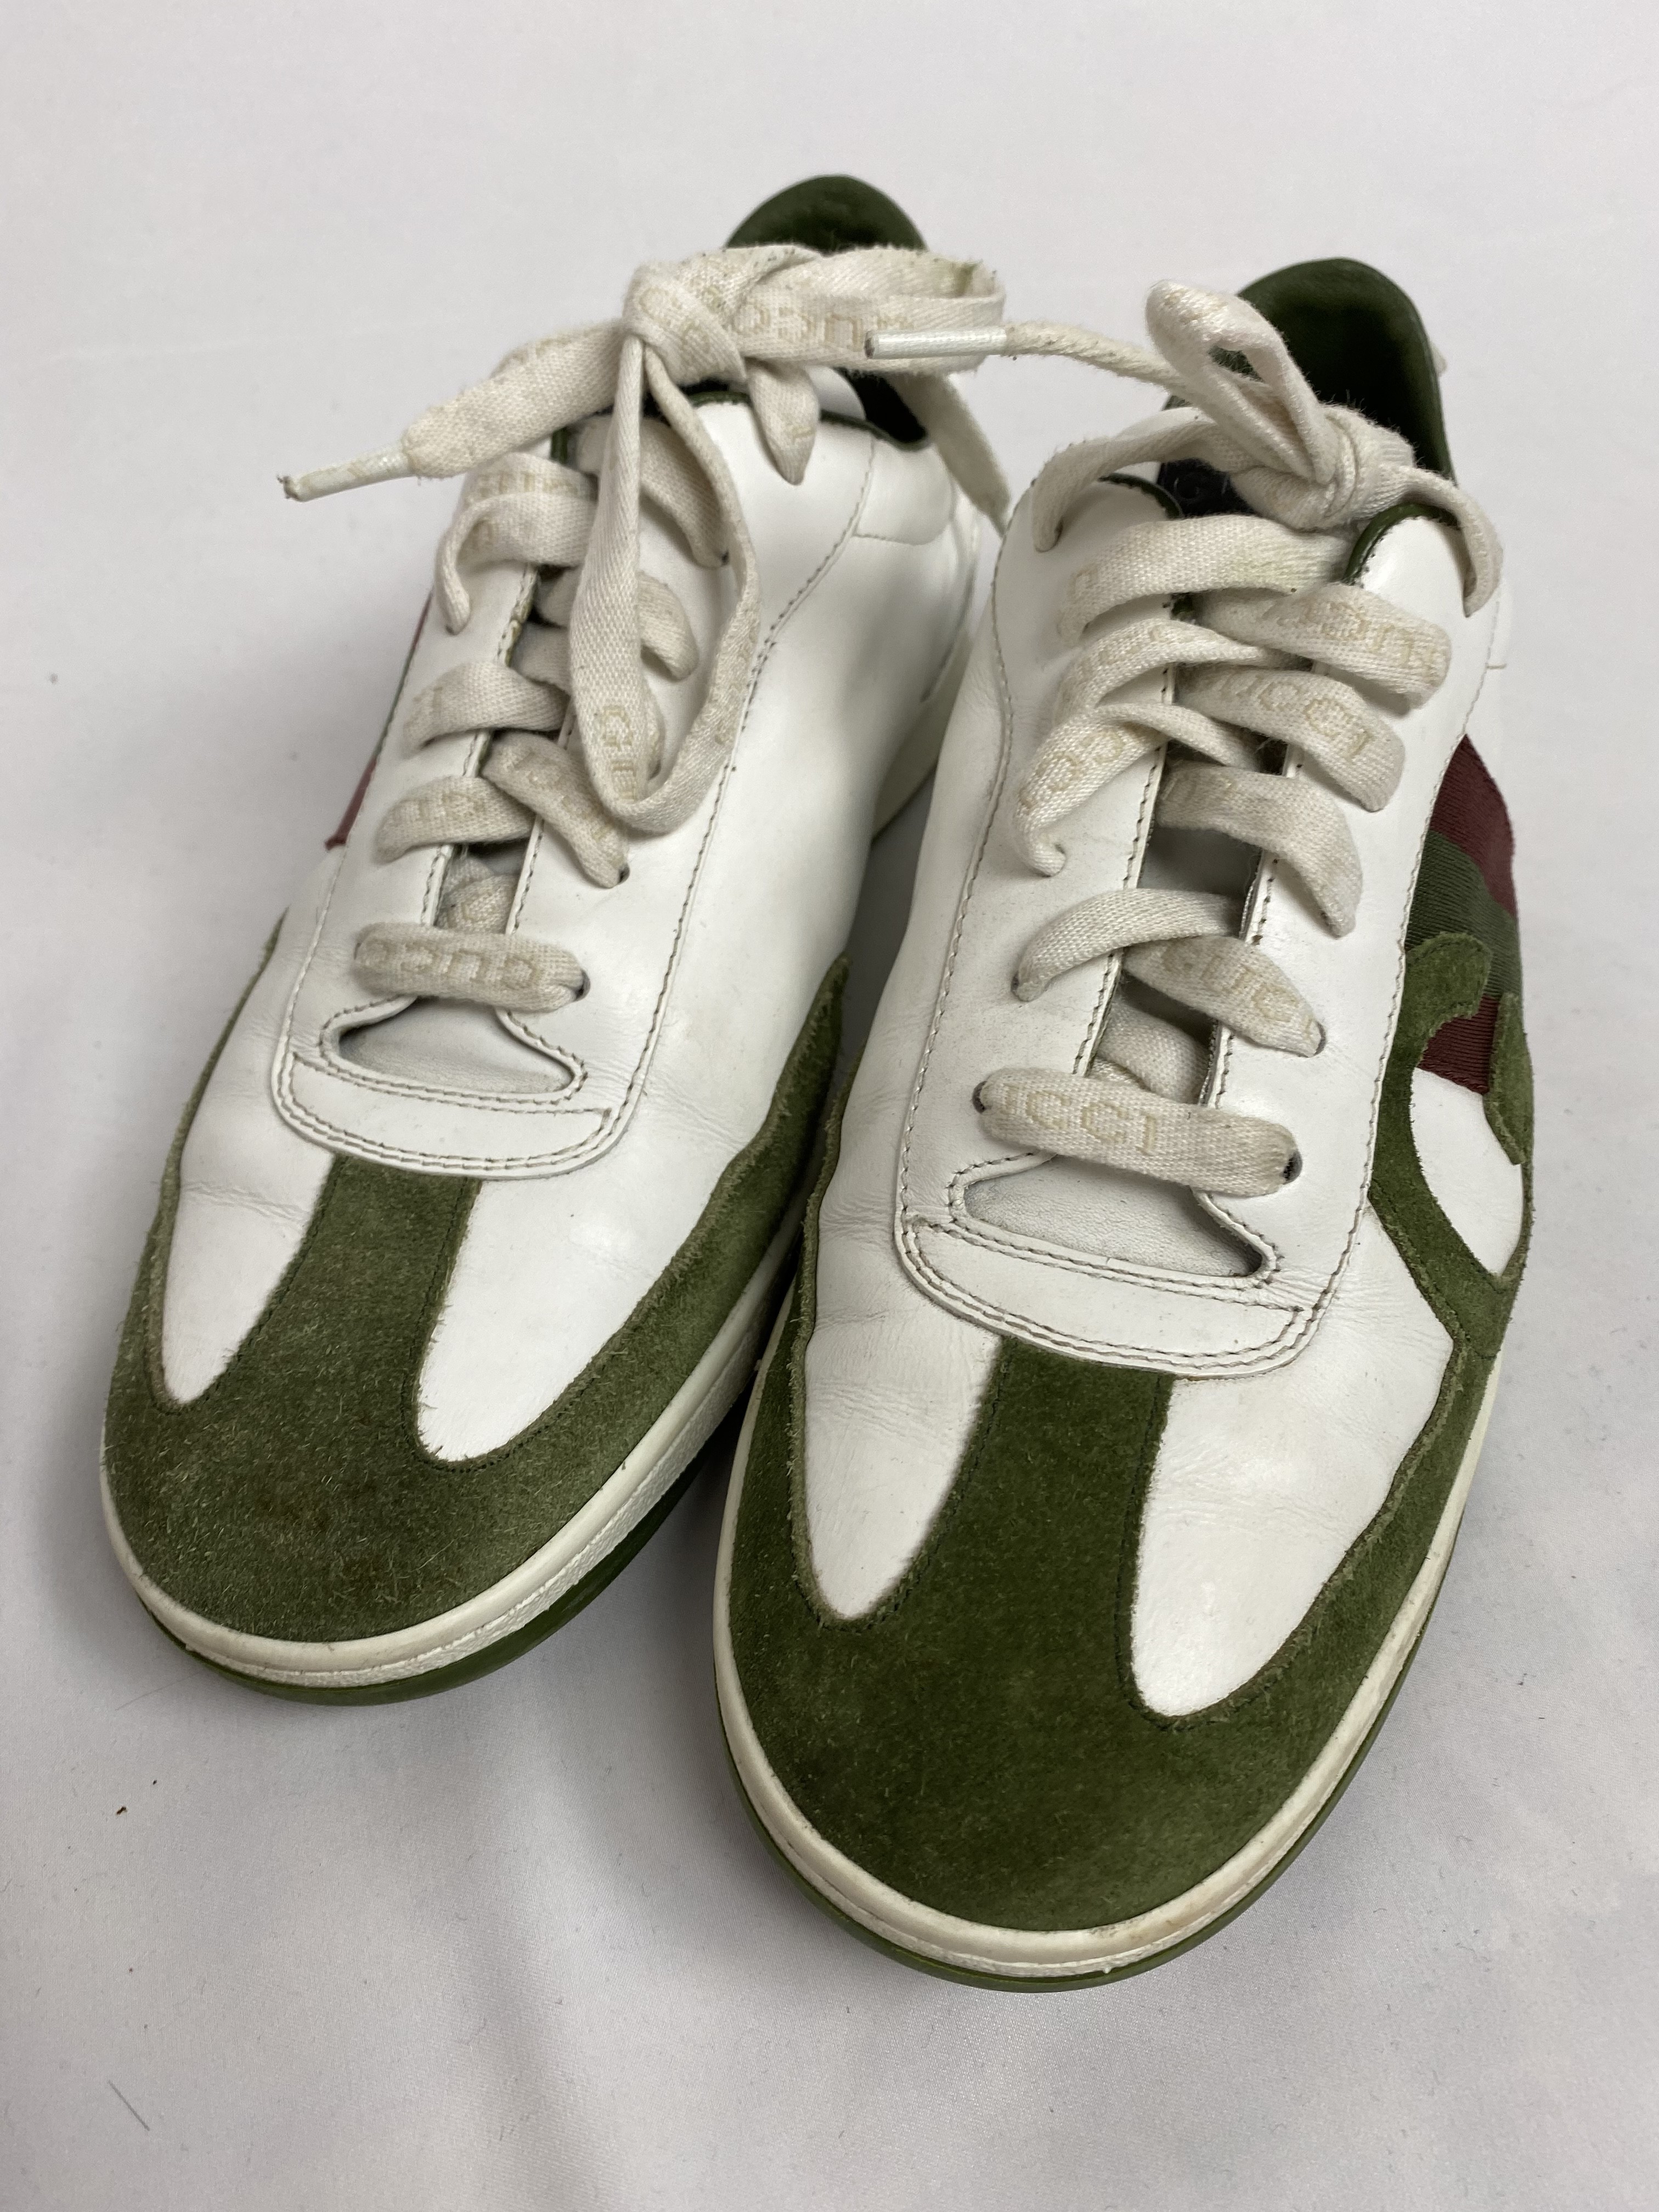 Gucci leather sneakers - 7